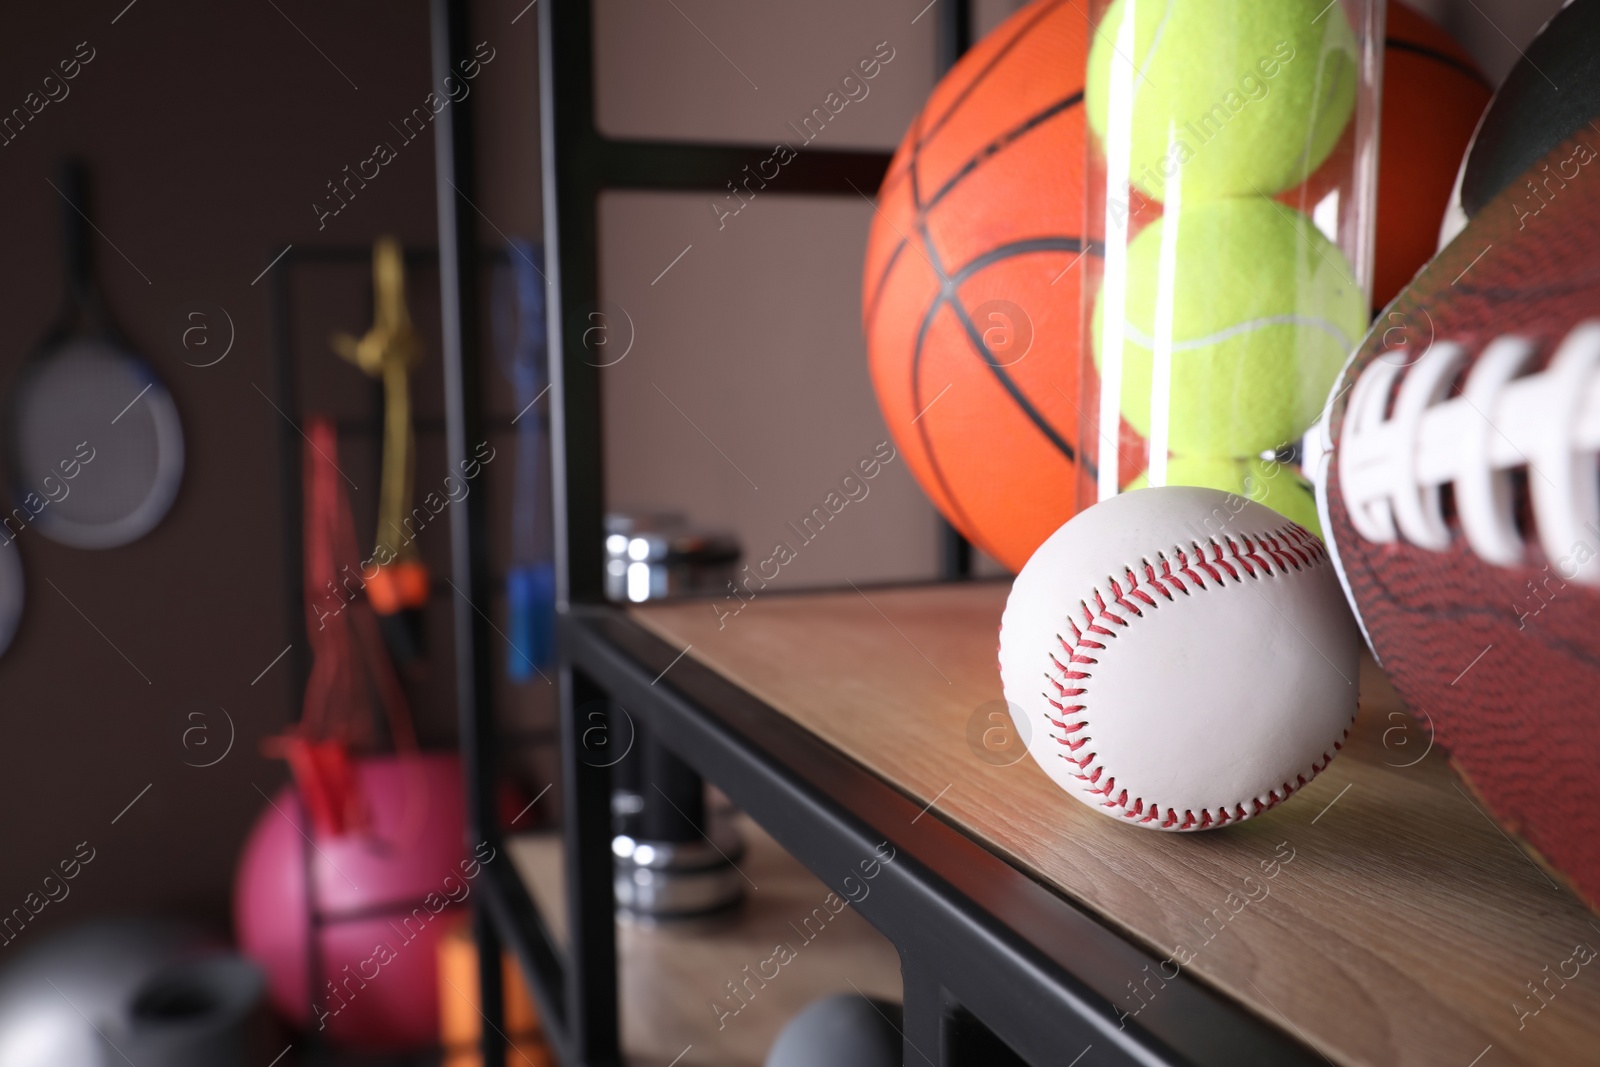 Photo of Different sport balls on shelf in room with other sports equipment